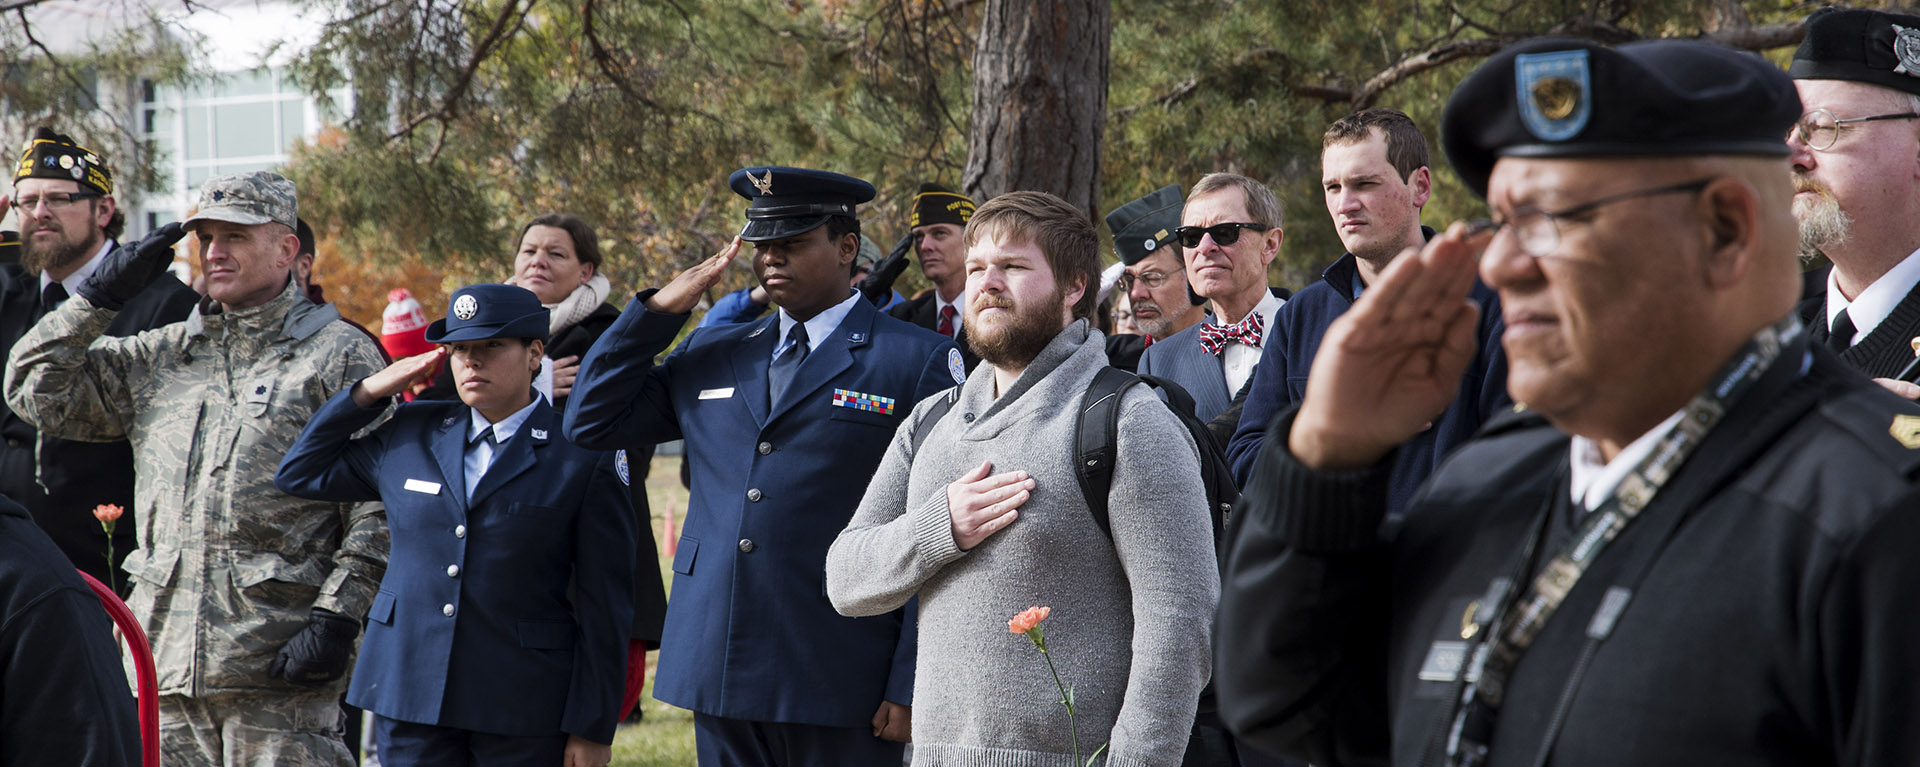 Washburn students and constituents honor veterans during an event on campus.